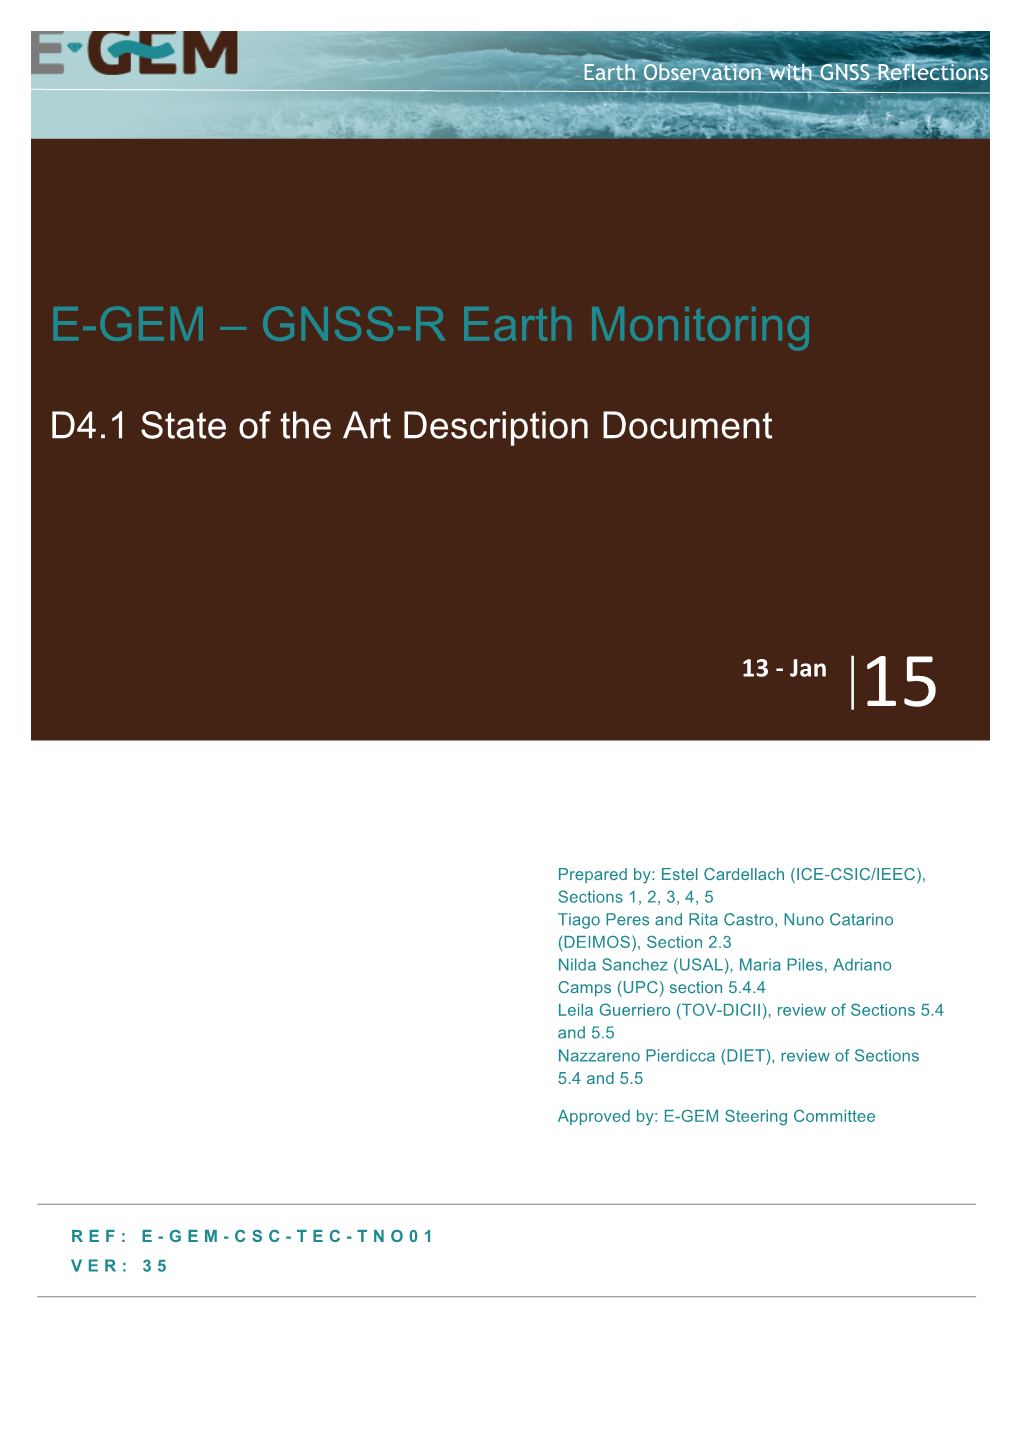 GNSS-R Earth Monitoring